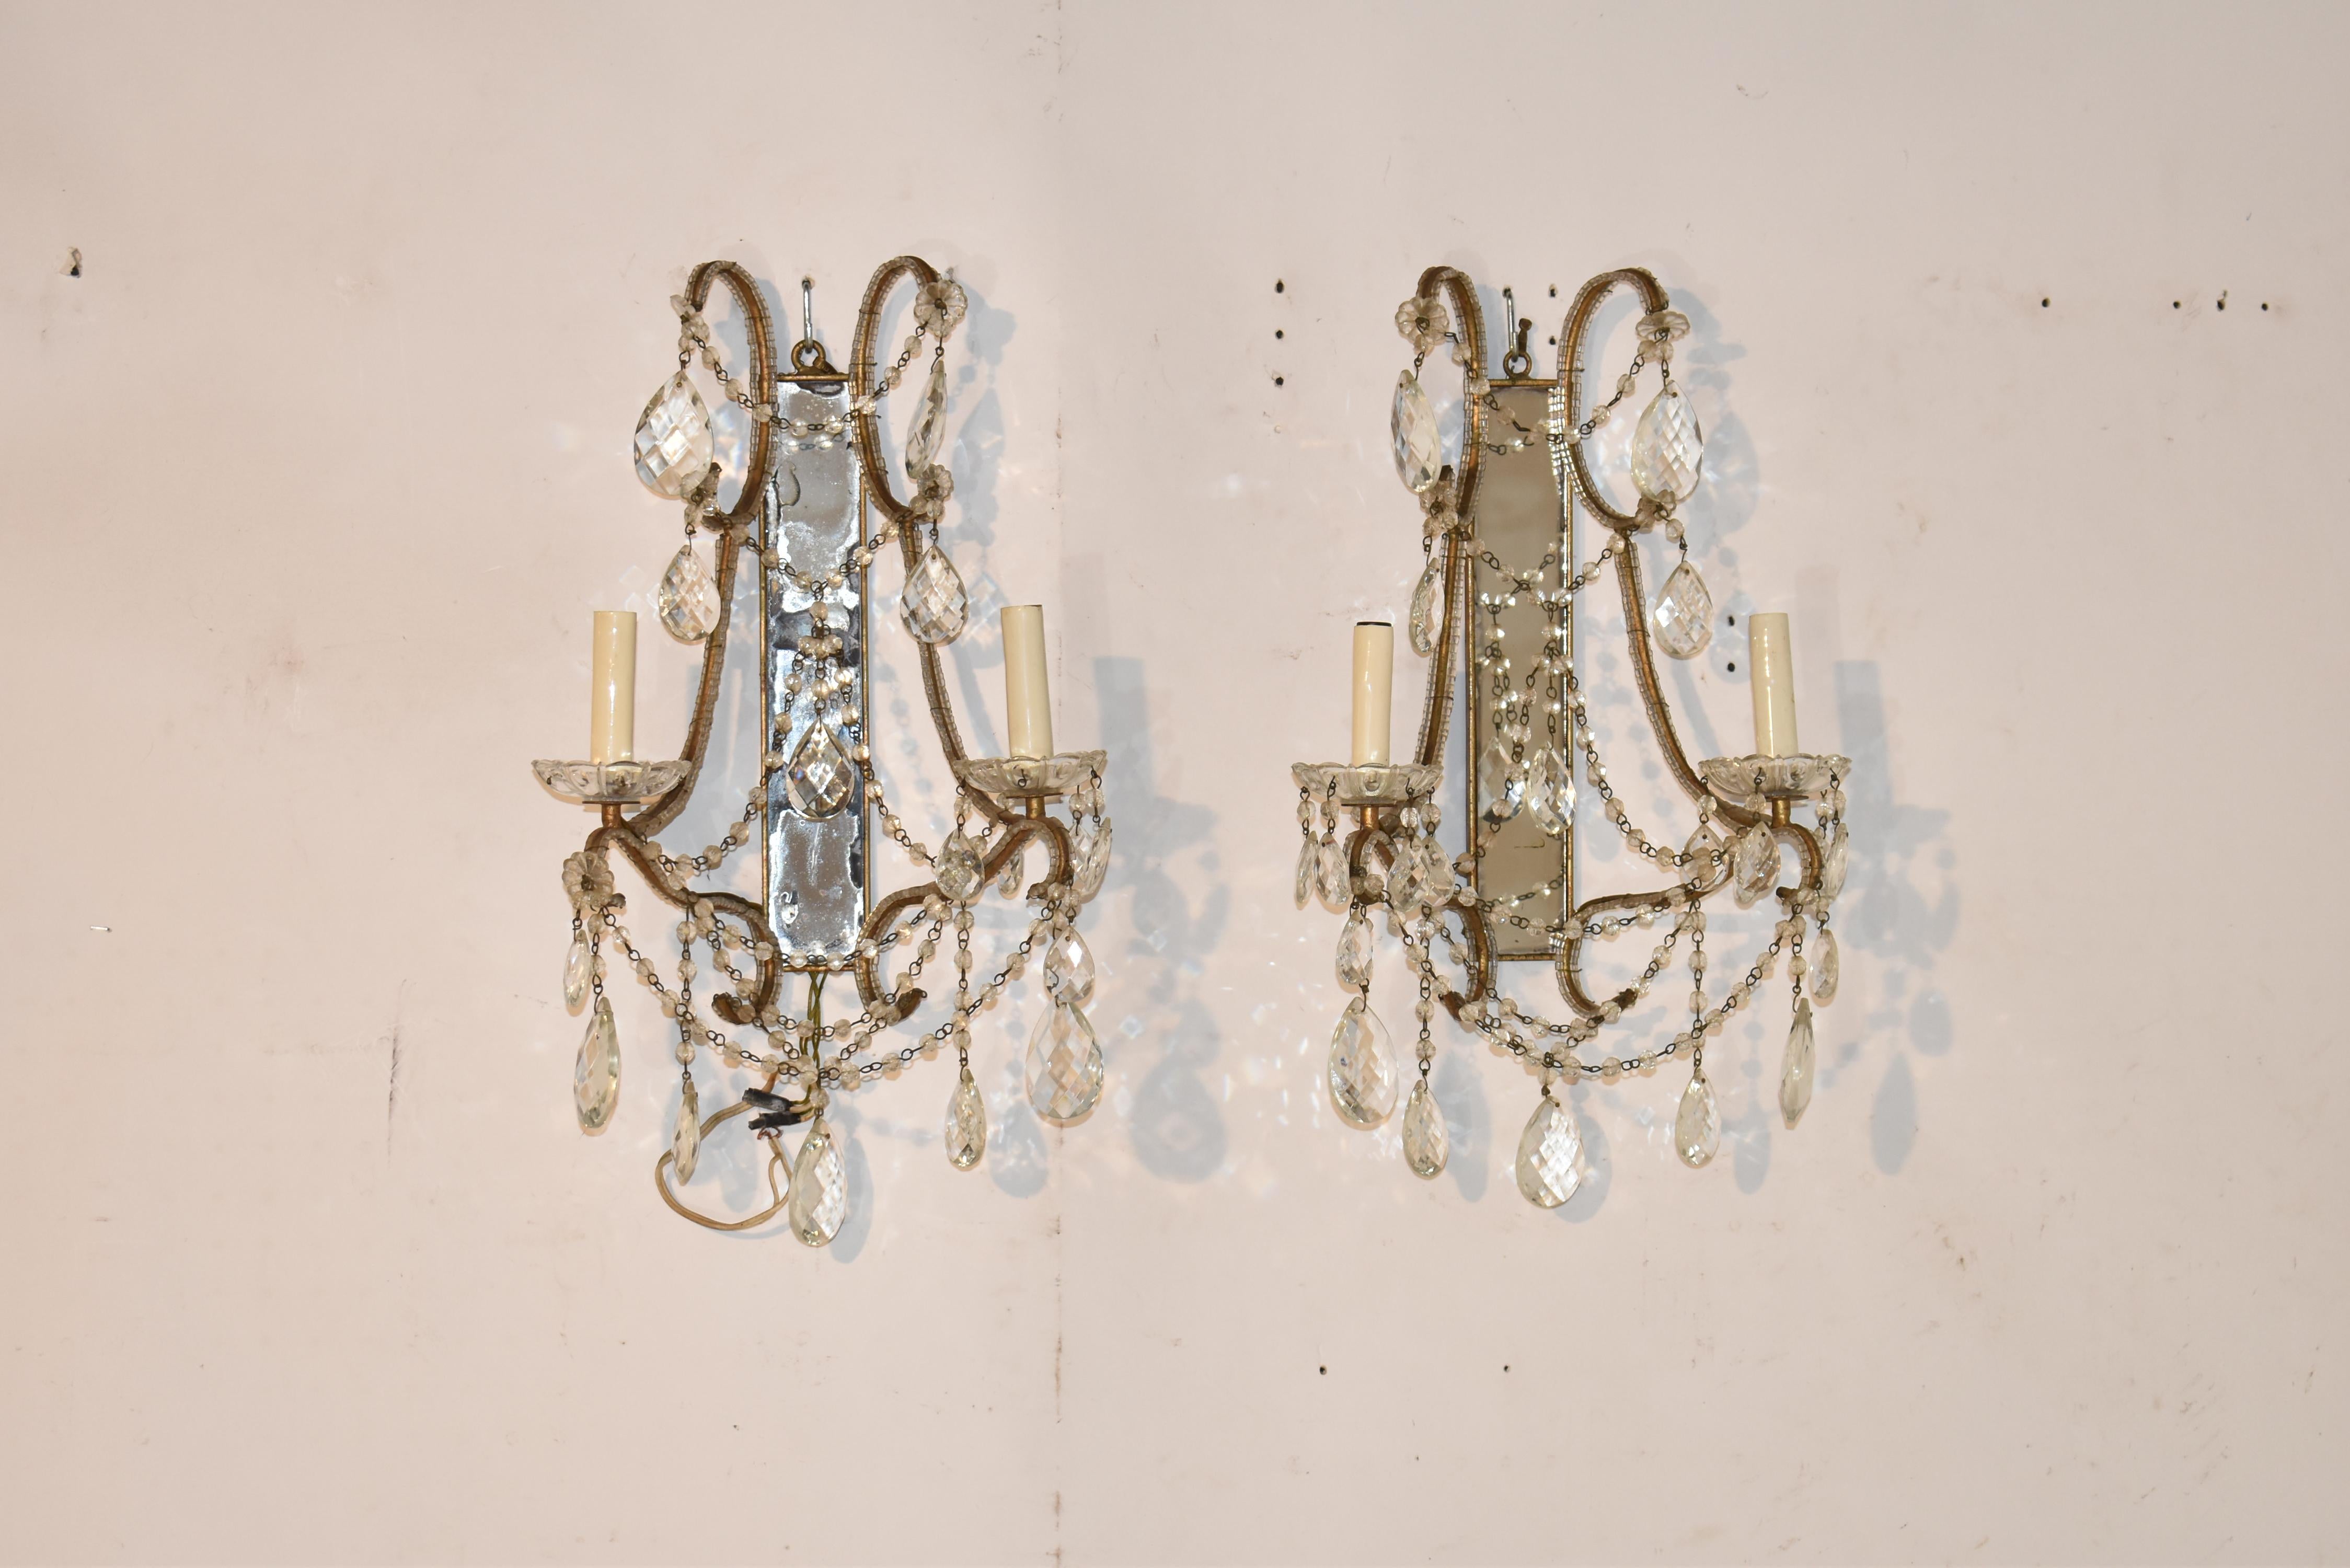 Wonderful pair of mirrored wall sconces with two arms, joined by graceful glass beaded swags and finished with hanging faceted drop crystals.  The two arms, each with a single candles resting on glass bobeches.  Lovely in any room in which you